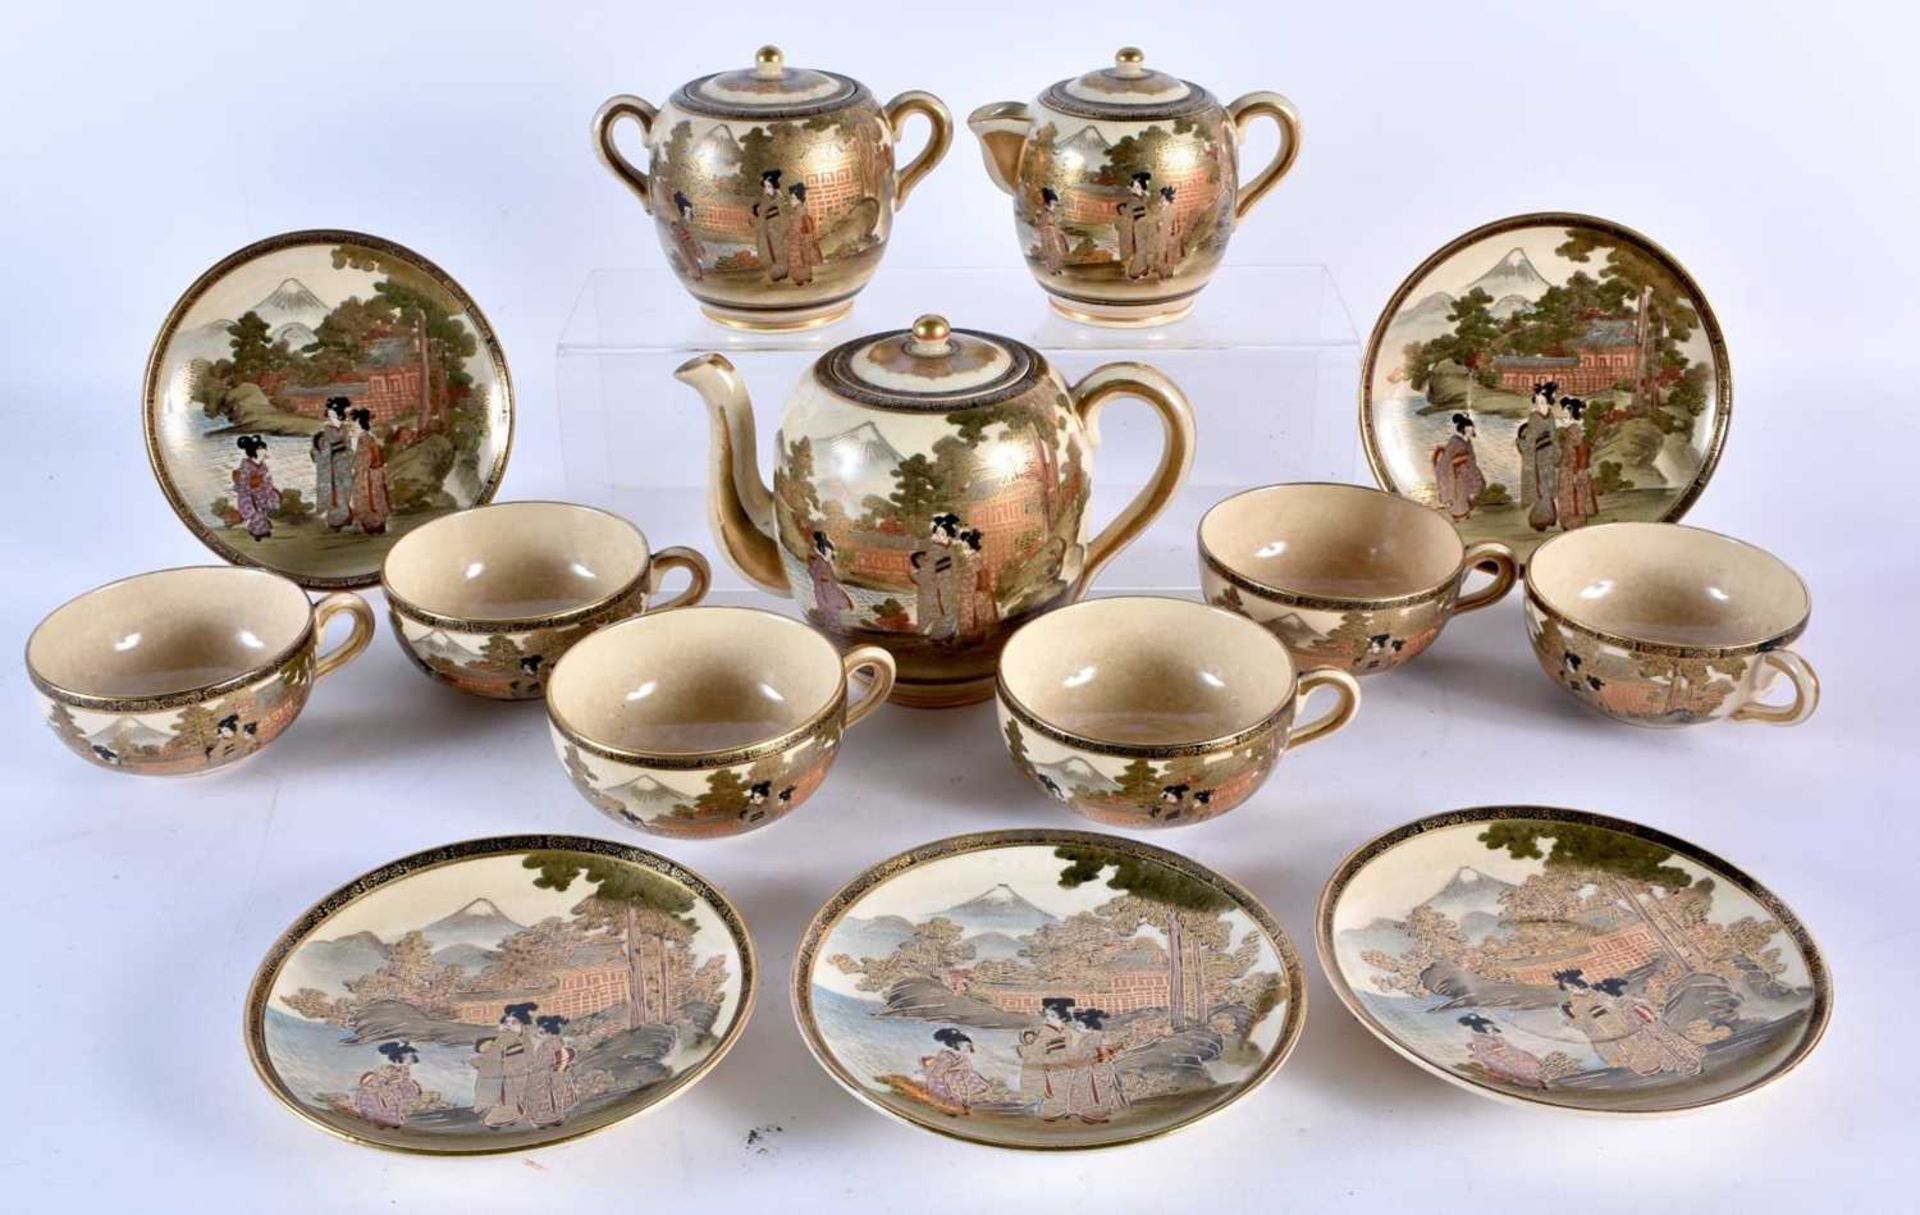 A LATE 19TH CENTURY JAPANESE MEIJI PERIOD SATSUMA TEASET painted with figures and landscapes.